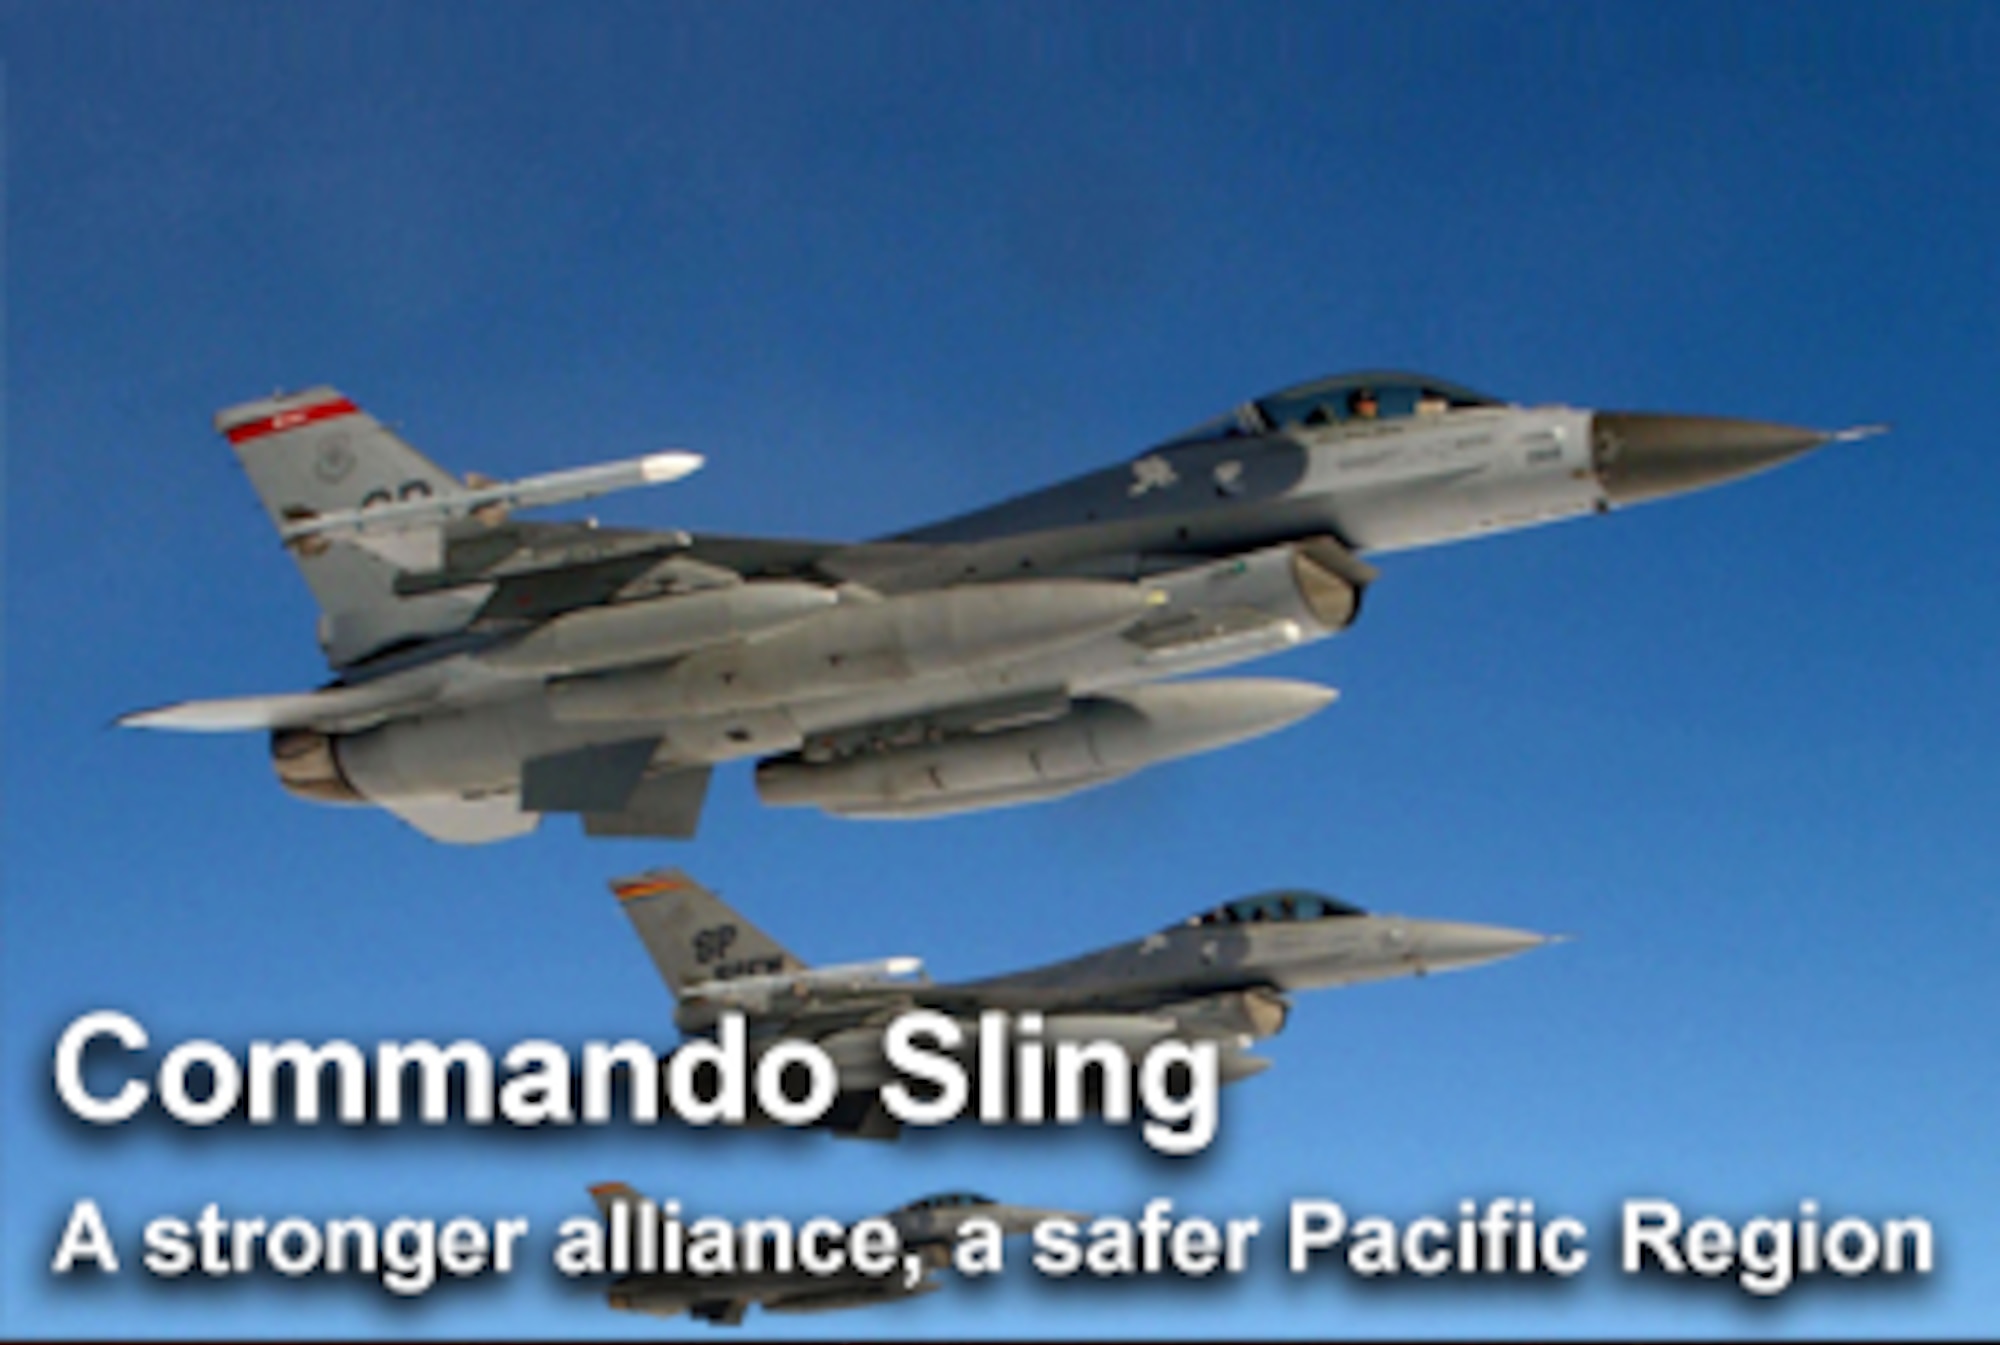 Commando Sling is primarily an air-to-air combat exercise at Paya Lebar Air Base, Singapore. The goal of Commando Sling is a stronger alliance and a safer Pacific Region. (U.S. Air Force photo illustration)